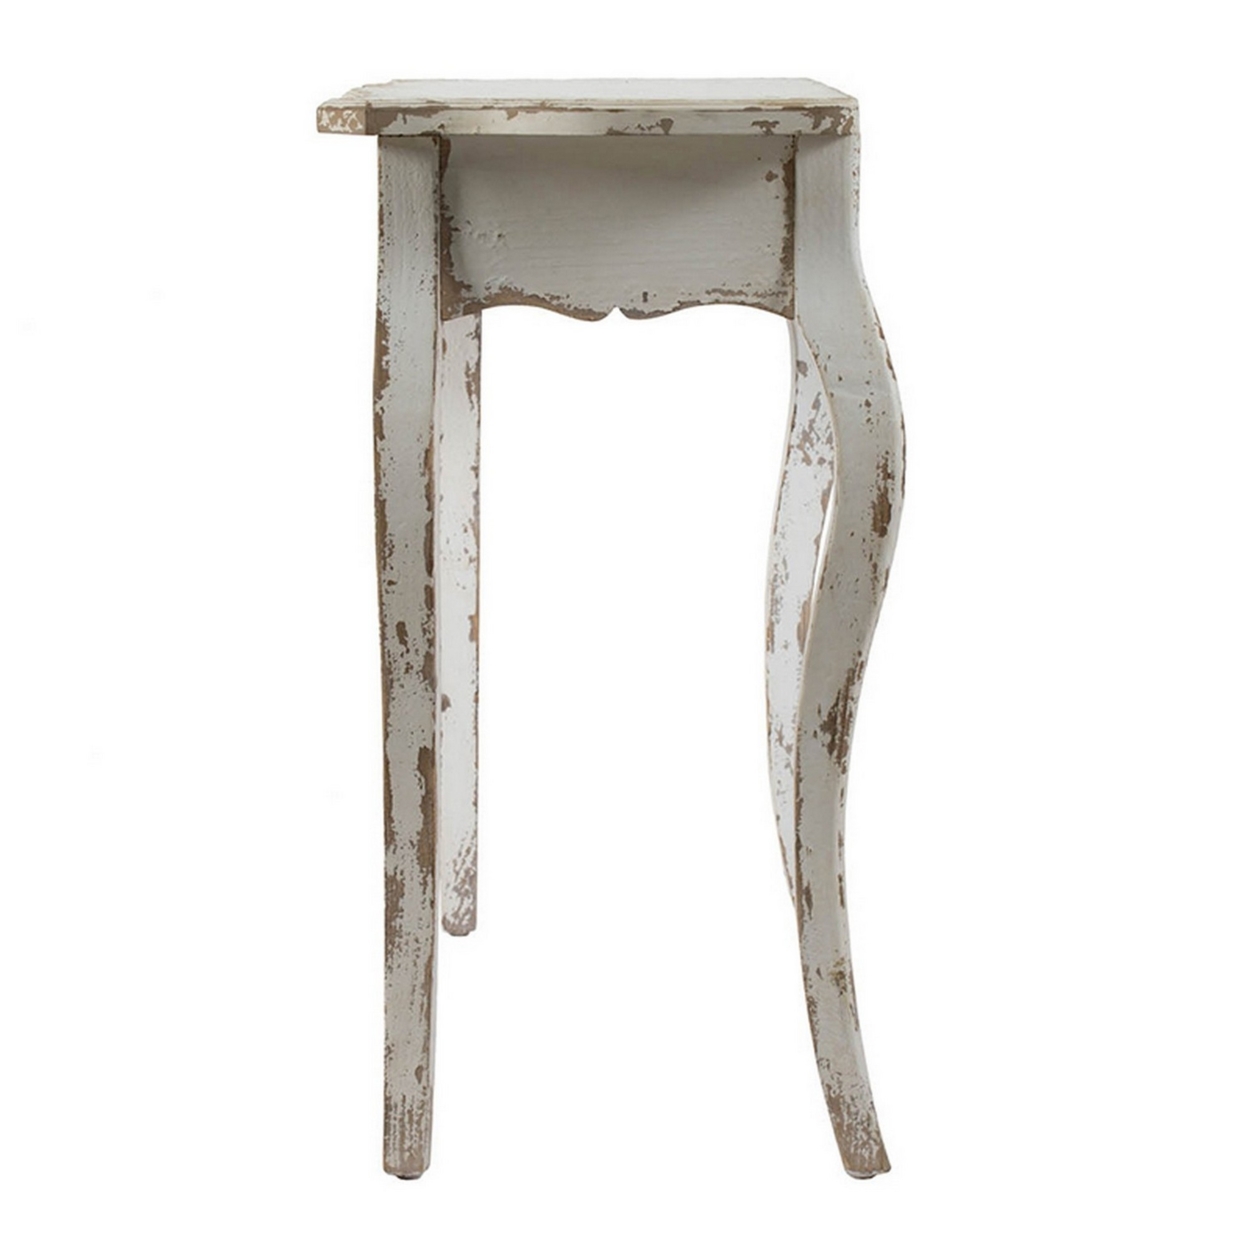 30 Inch Console Table, Fir Wood, Rectangle, Curved Legs, Distressed White, Saltoro Sherpi